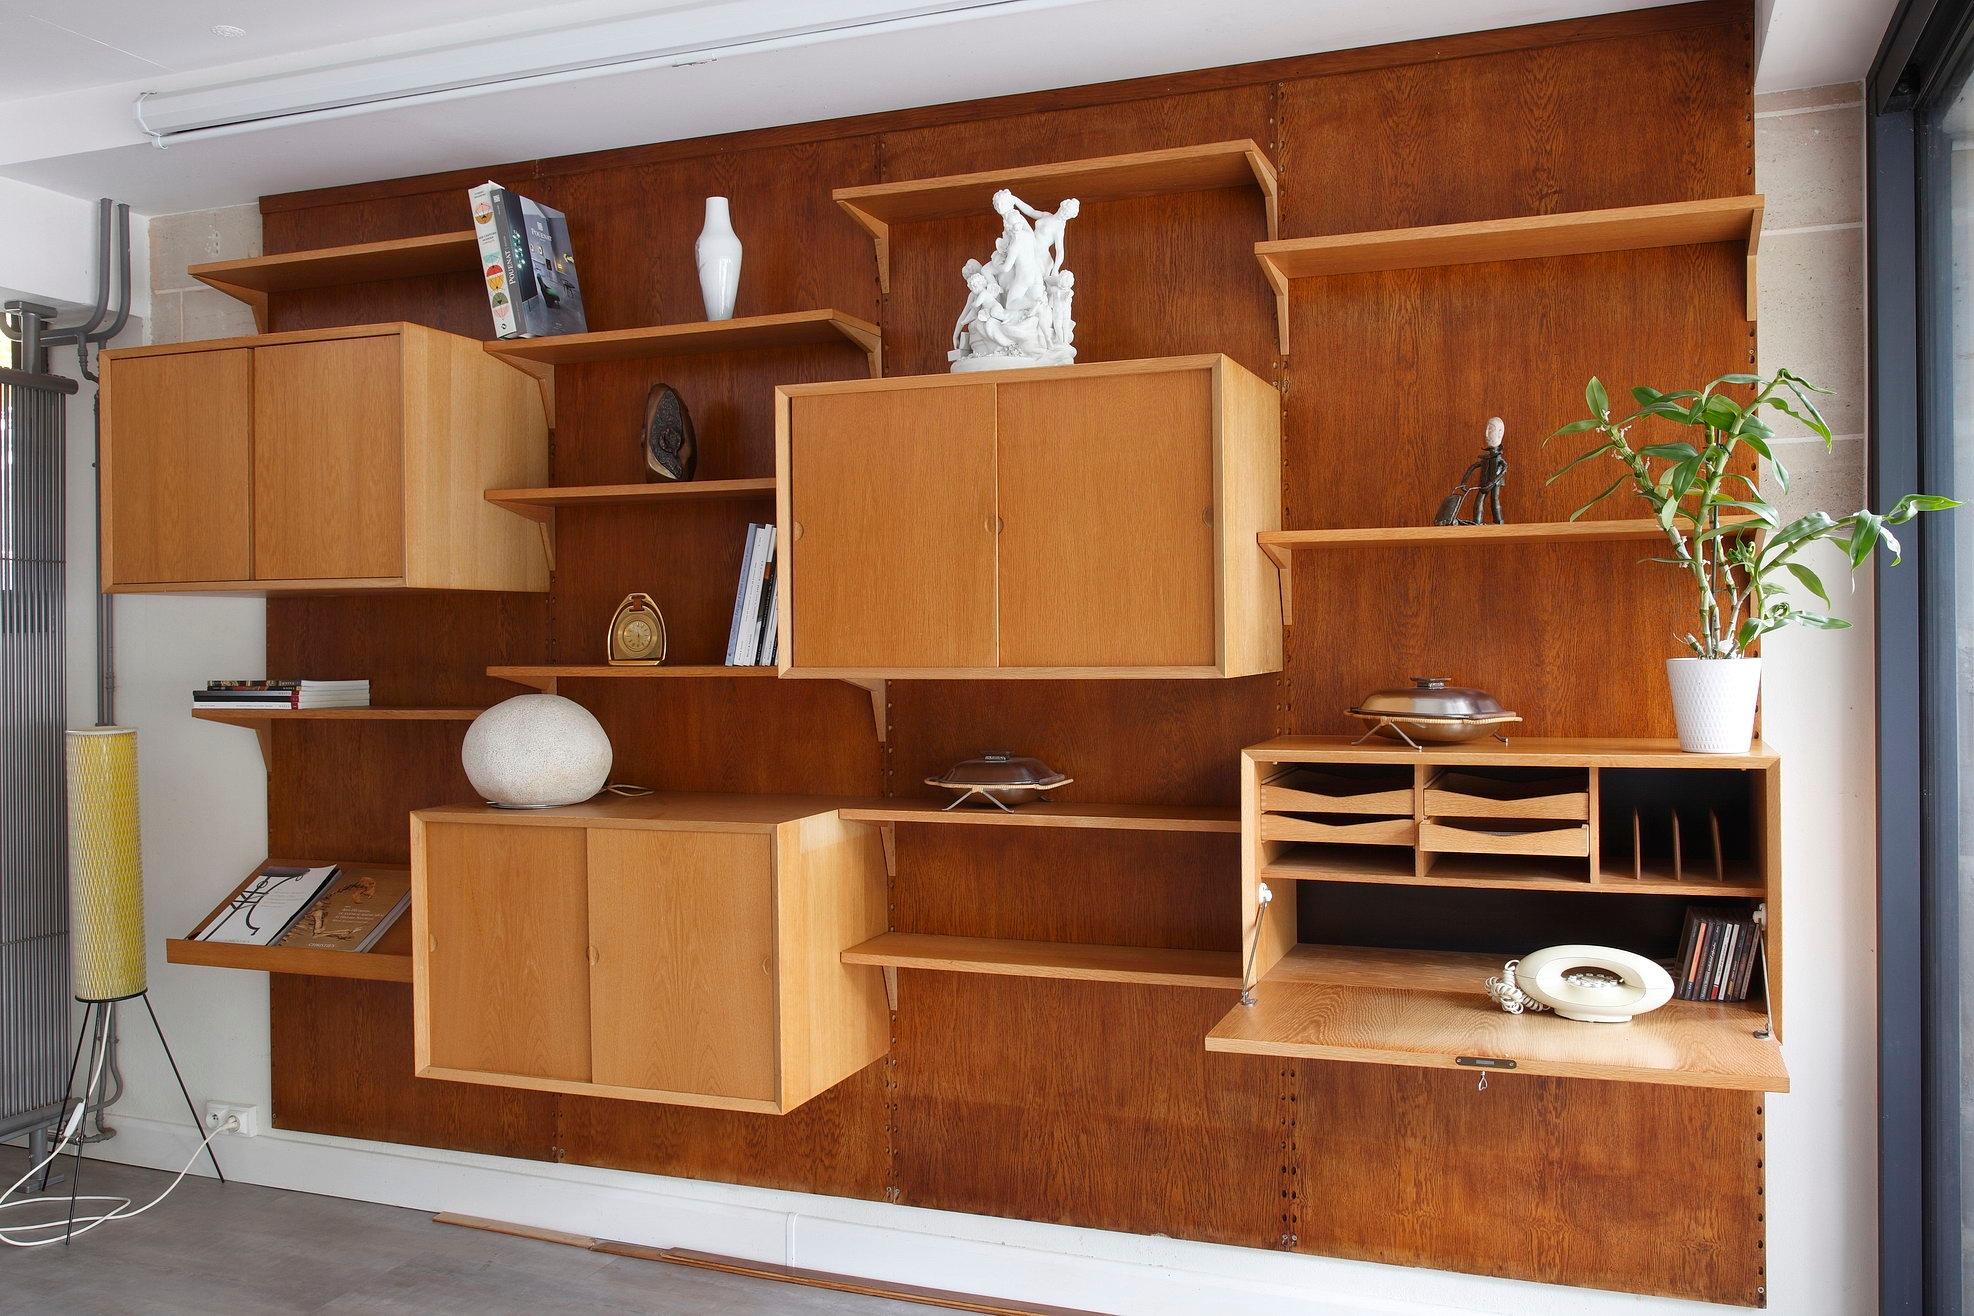 Cado wall system crafted in oak by Poul Cadovius (Denmark, 1911-2011) in the 1960s. This modular shelving system consists of four vertical panels with several shelves and cabinet units :

- 10 shelves (P: 22cm)
- 2 cabinet units with sliding